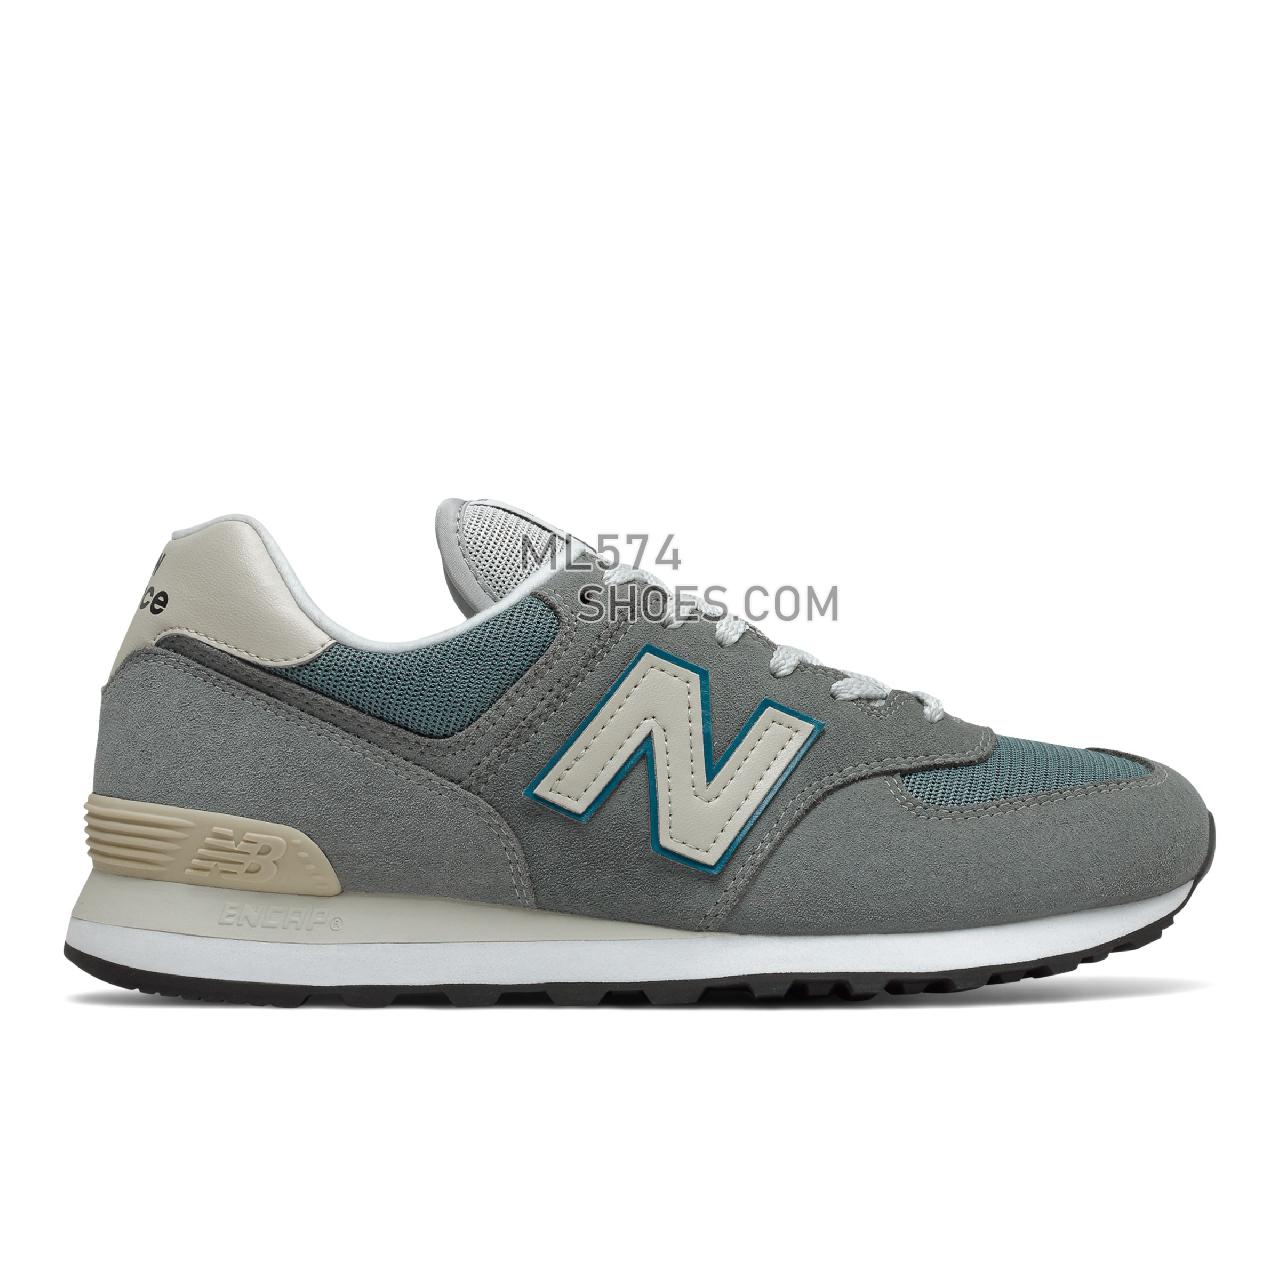 New Balance 574v2 - Men's Sport Style Sneakers - Grey with Sky Blue - ML574BA2